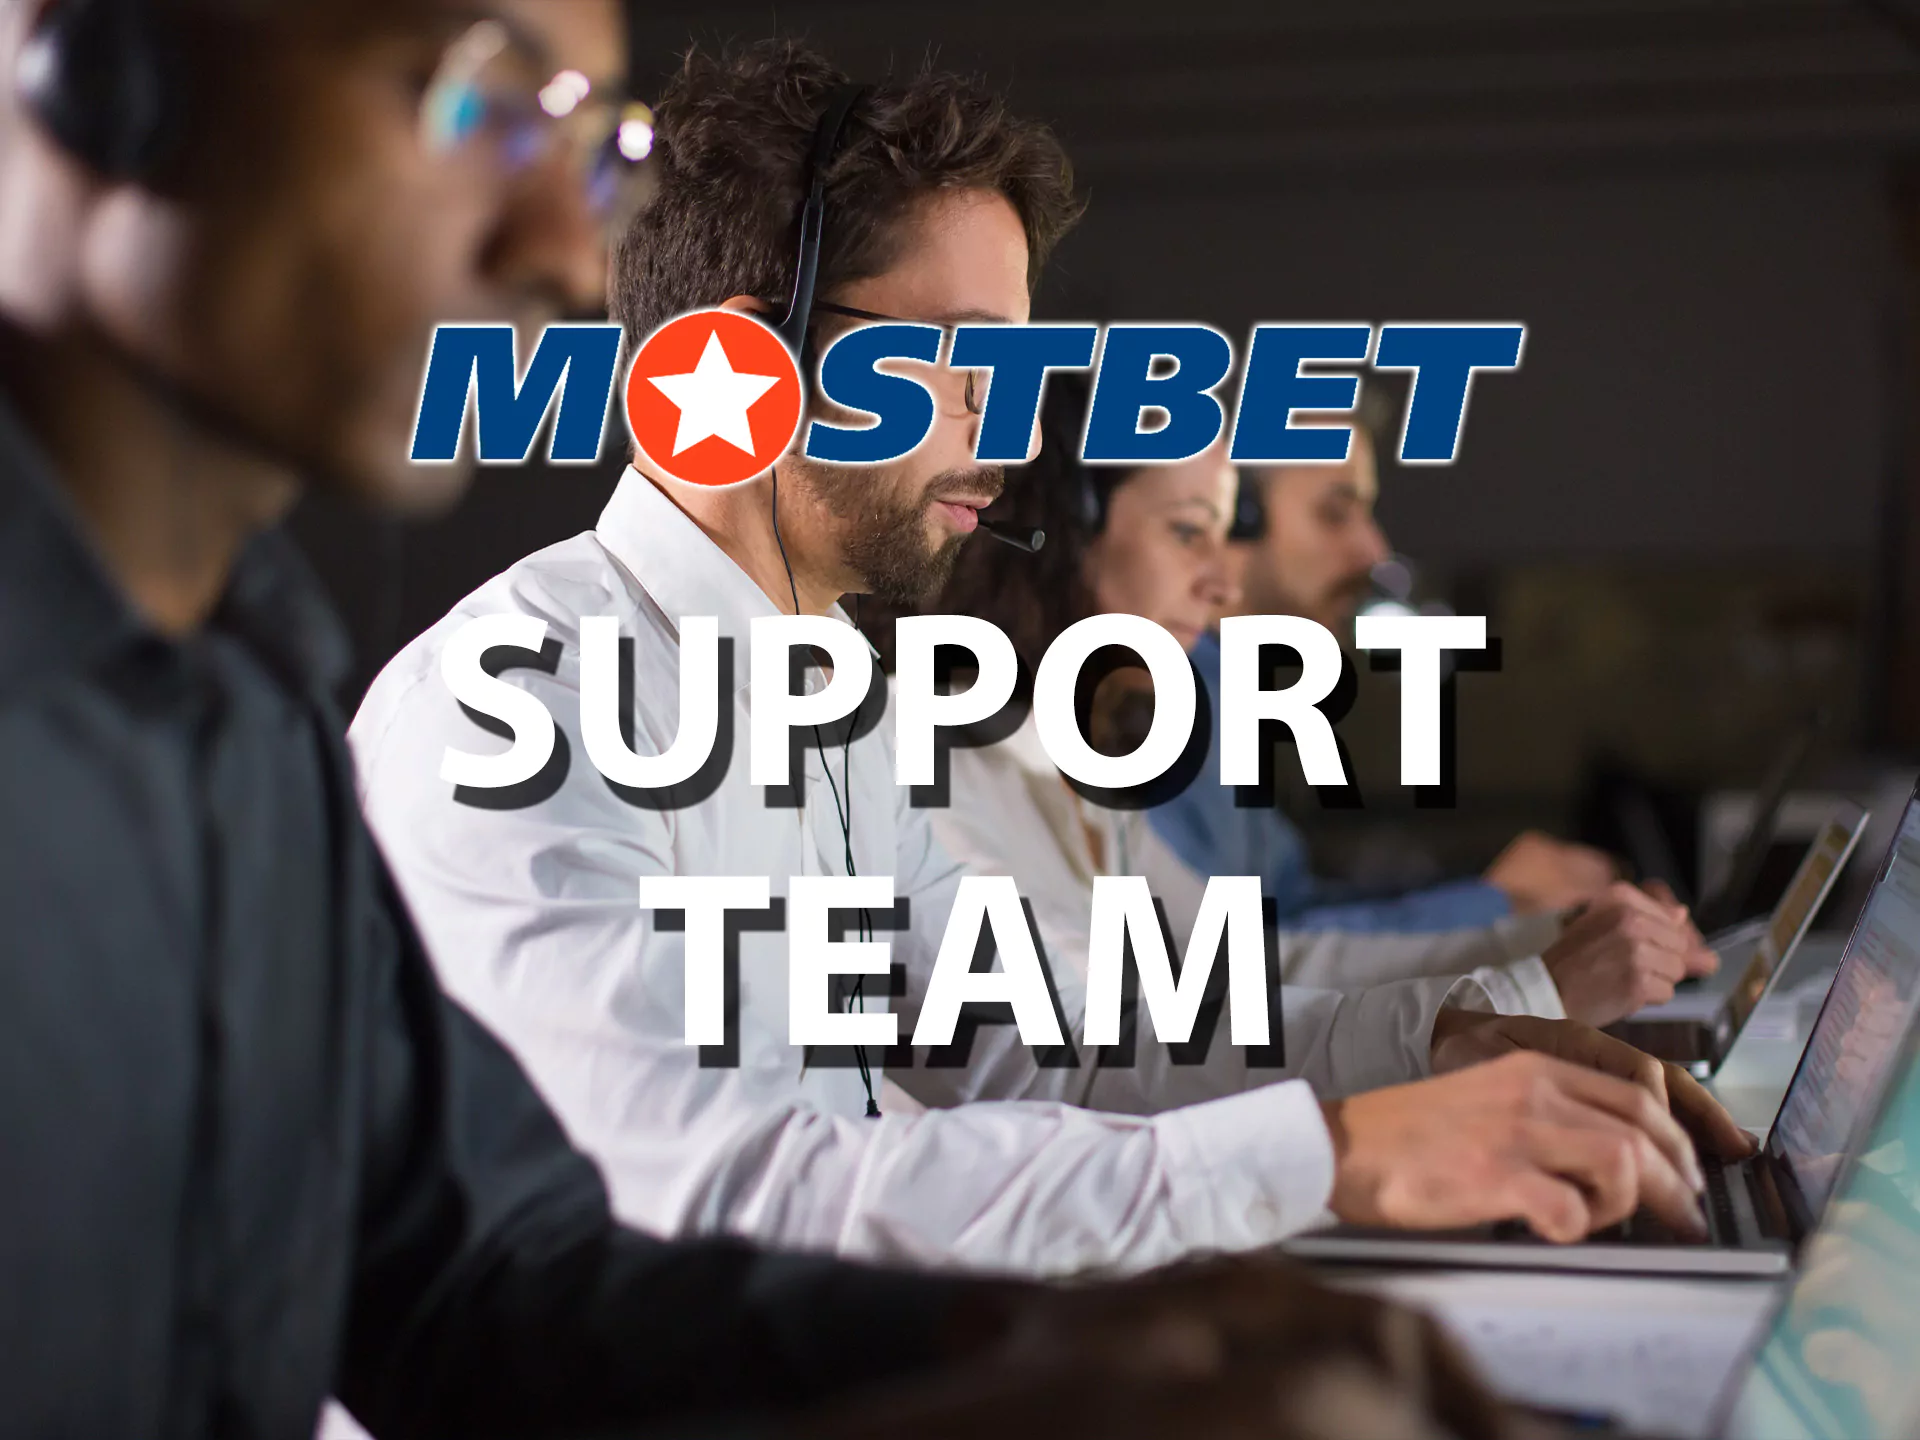 Contact our support team if you have any problems.